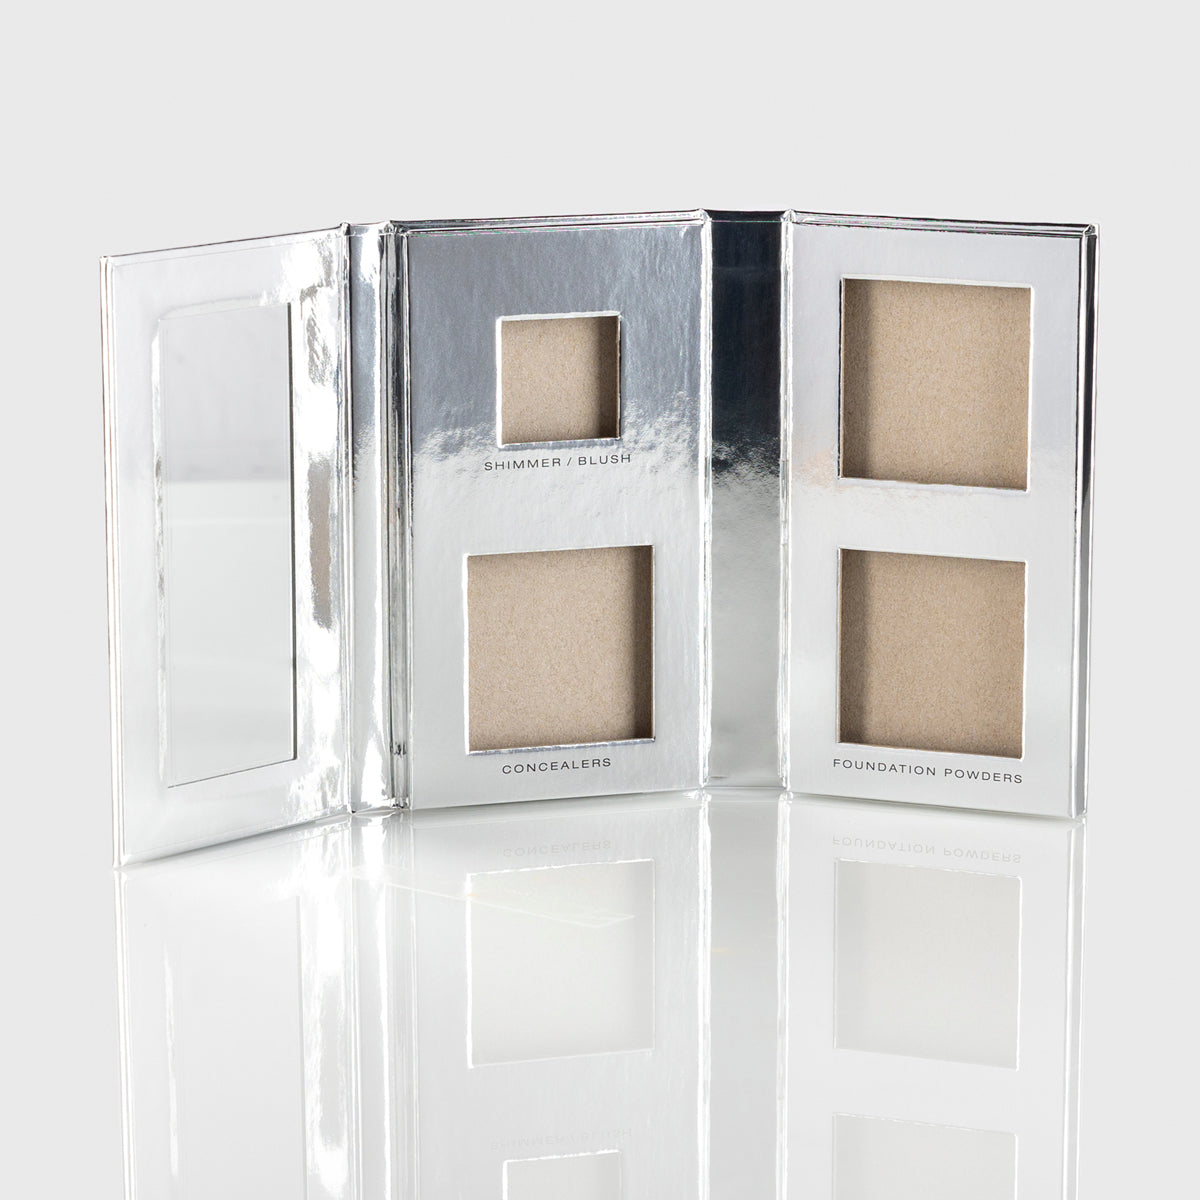 a photo of an empty silver makeup palette with mirrored flap and slots for 1 blush or shimmer, 2 concealers and 2 foundation powders